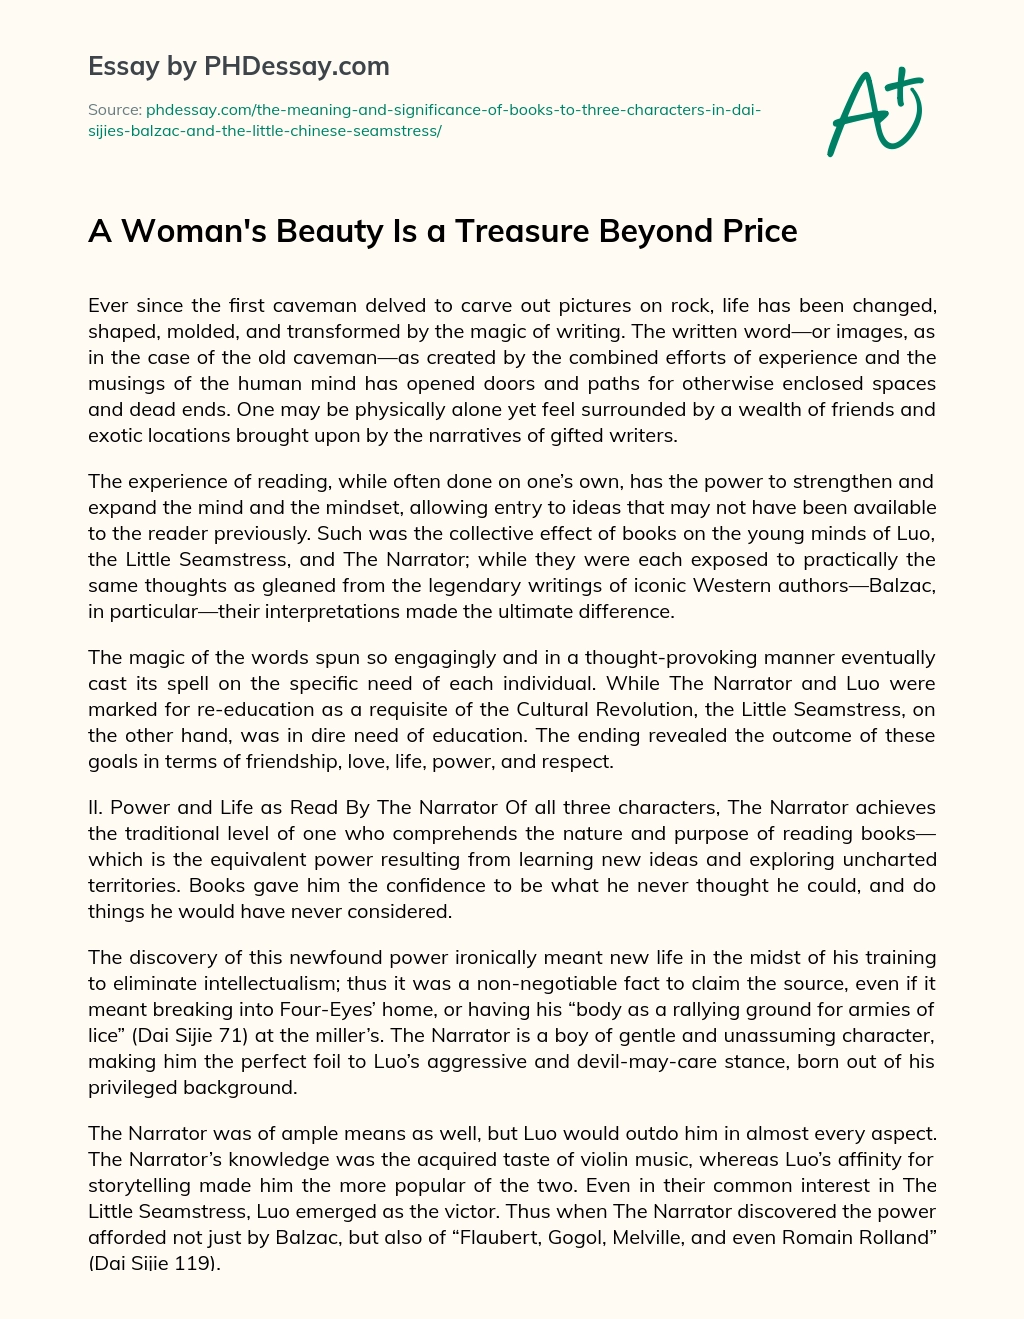 A Woman’s Beauty Is a Treasure Beyond Price essay